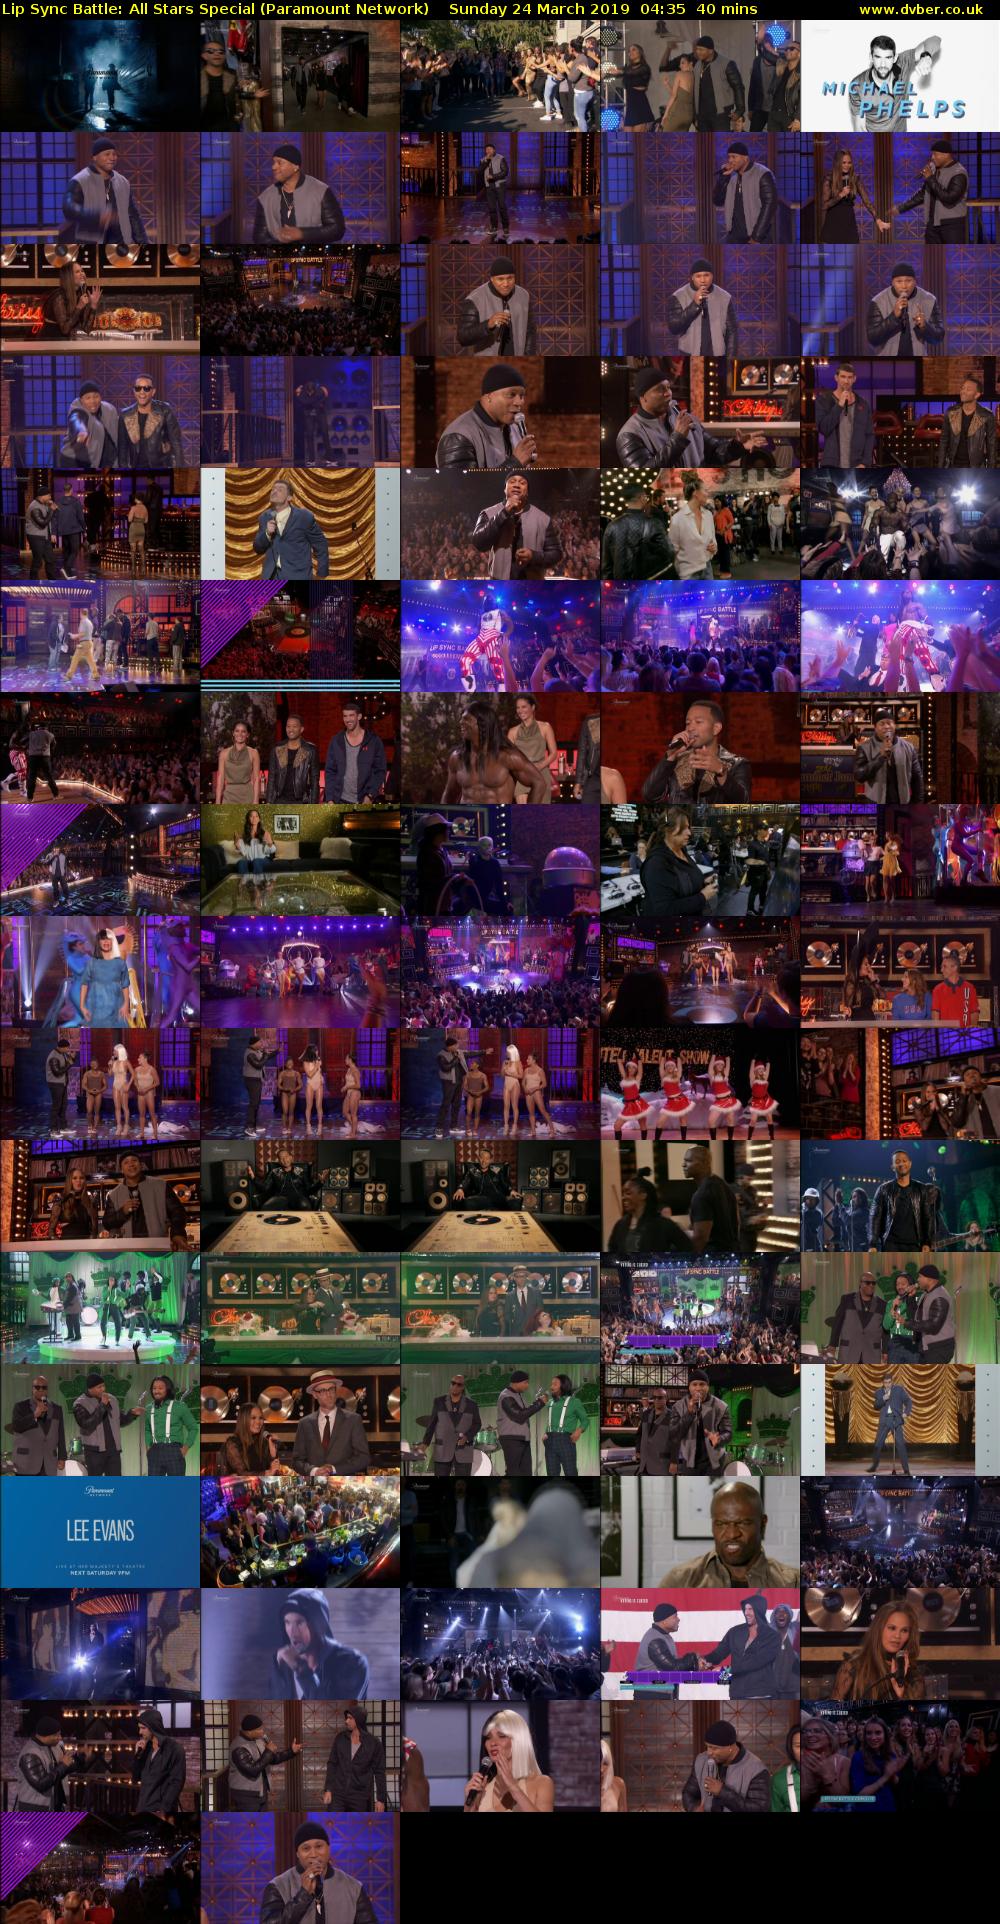 Lip Sync Battle: All Stars Special (Paramount Network) Sunday 24 March 2019 04:35 - 05:15